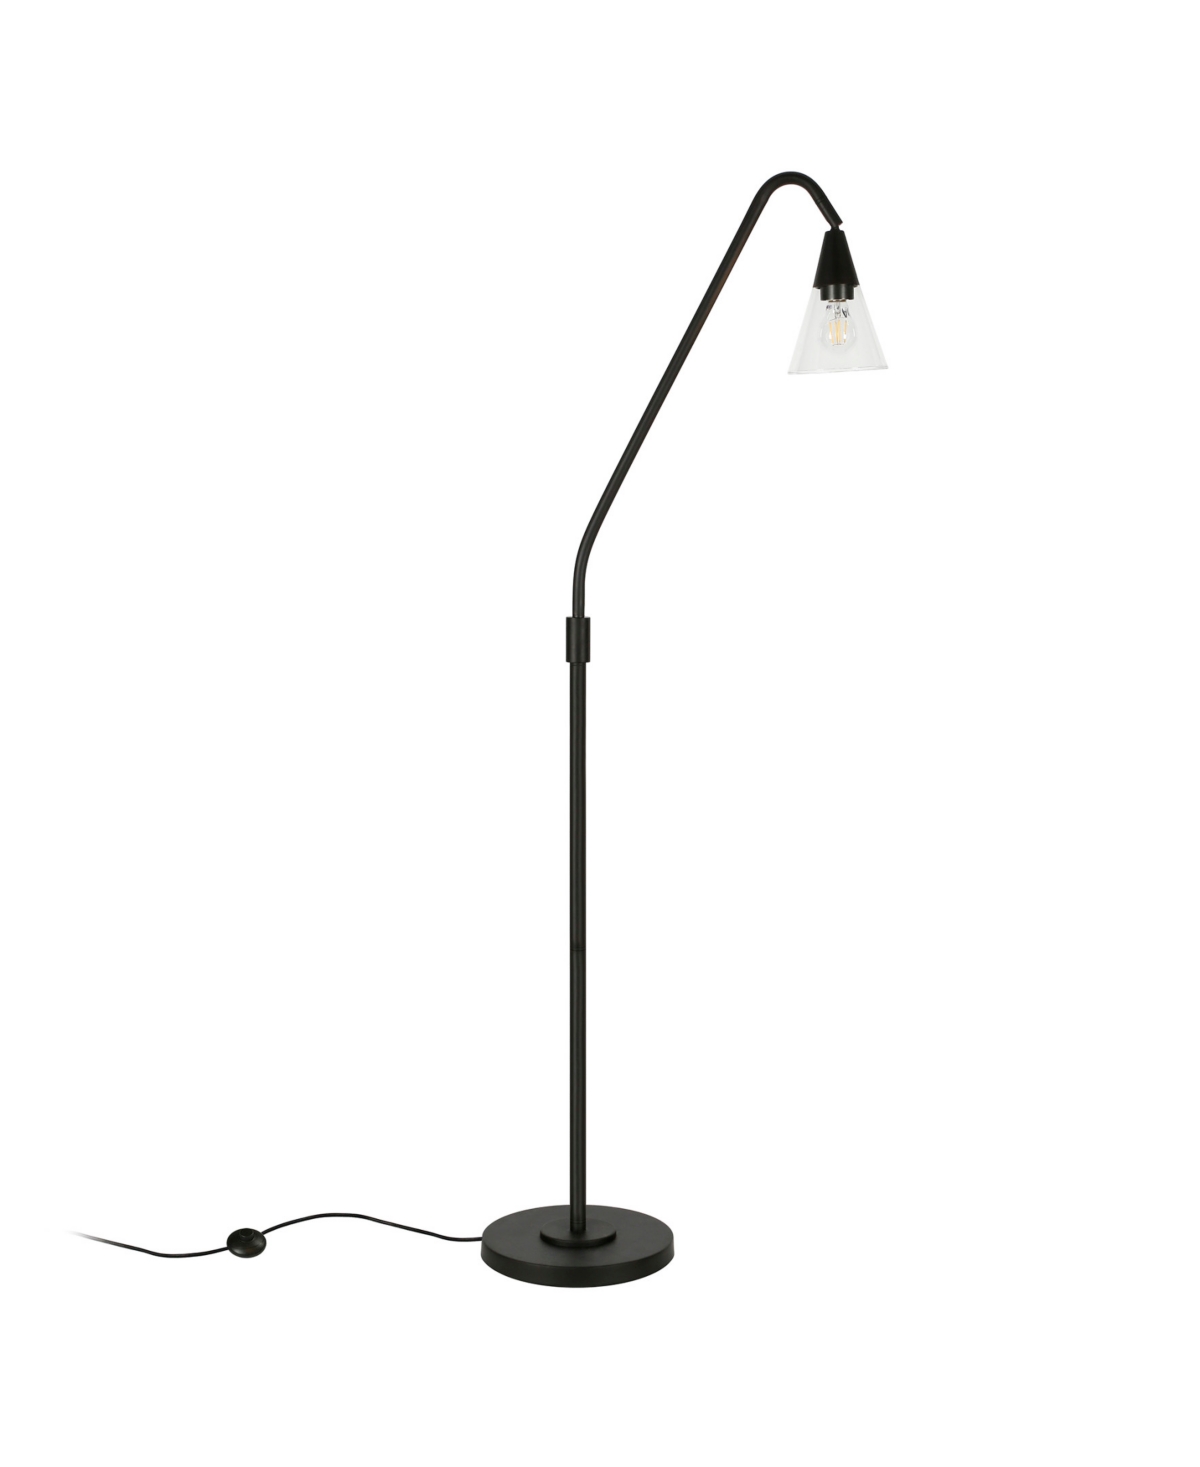 Hudson & Canal Challice 65" Glass Shade Arc Floor Lamp In Blackened Bronze